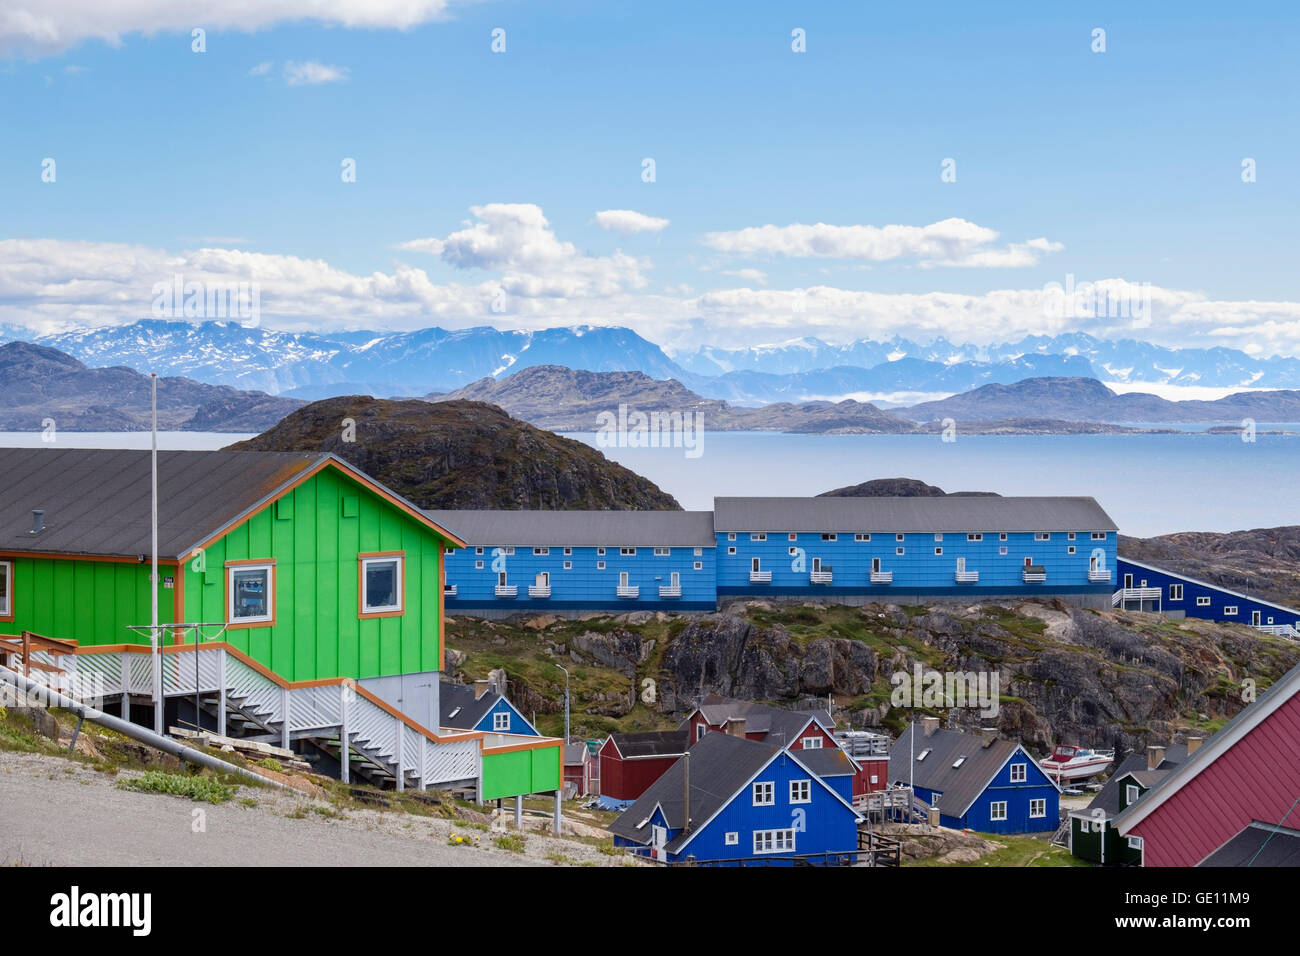 Colourful modern housing built on a hillside with view of coast and mountains. Sisimiut (Holsteinsborg) Qeqqata West Greenland Stock Photo